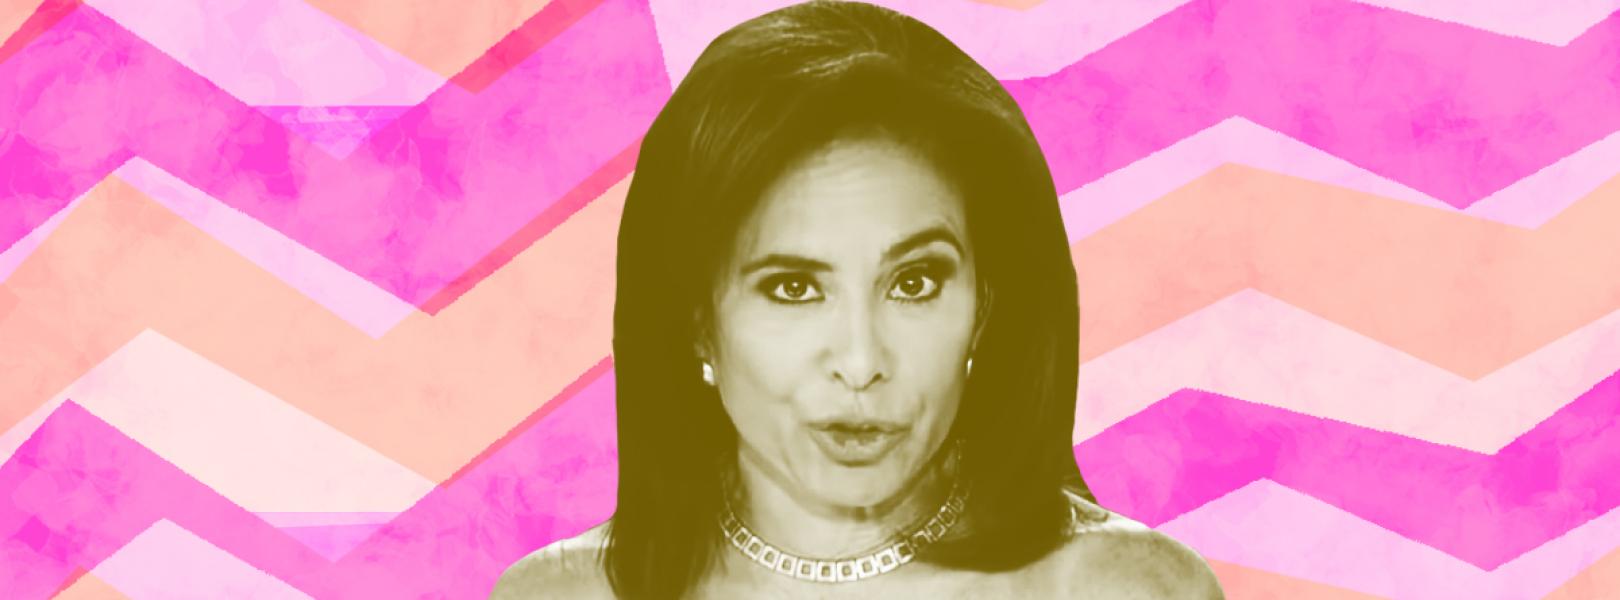 Fox suspended Pirro over her anti-Muslim bigotry against Rep. Ilhan Omar. The problem goes deeper than that